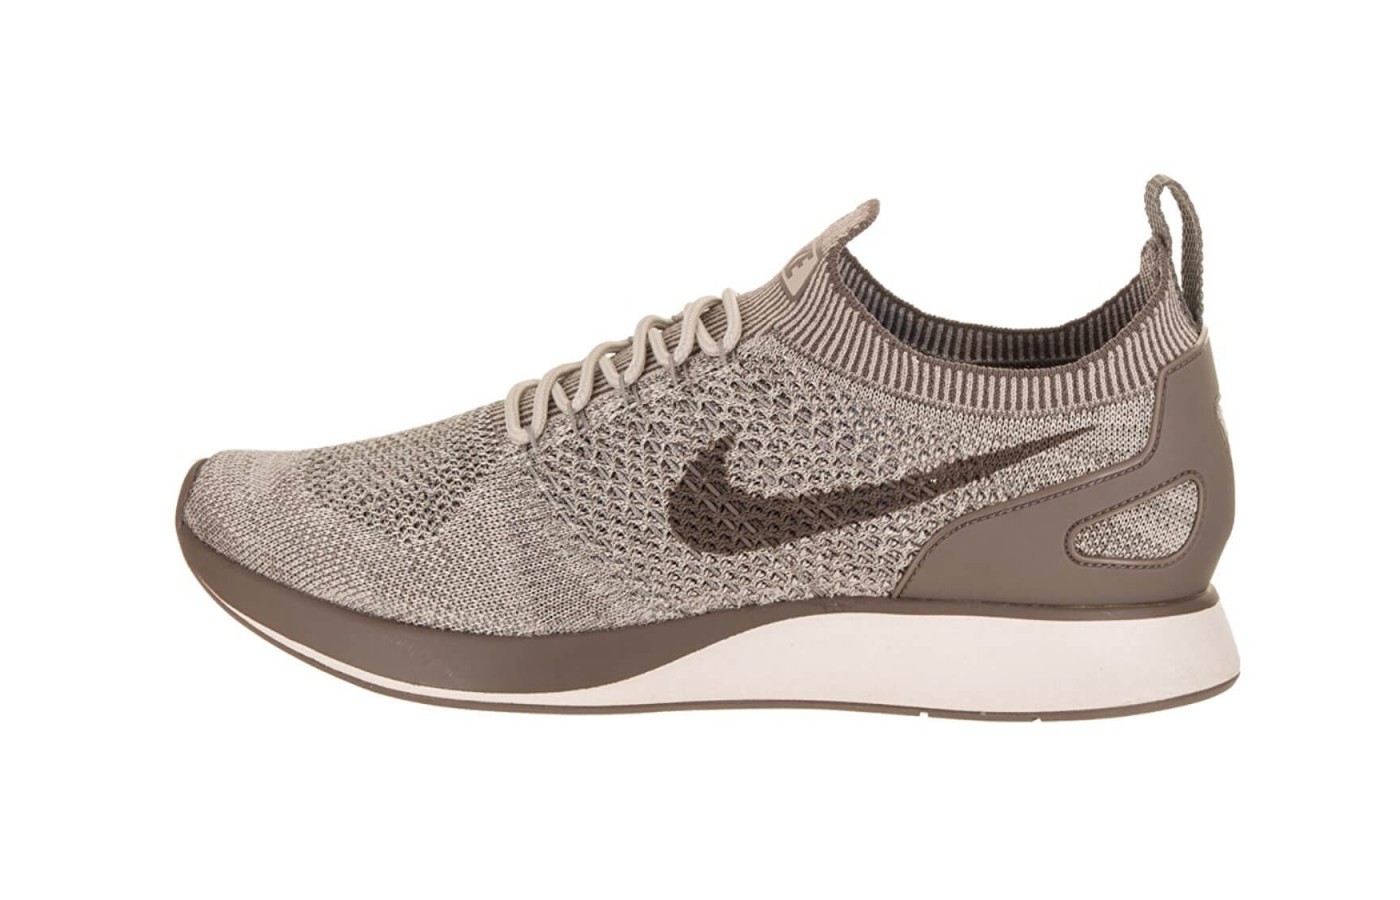 The Nike Air Zoom Mariah Flyknit Racer features Air Zoom midsole cushioning